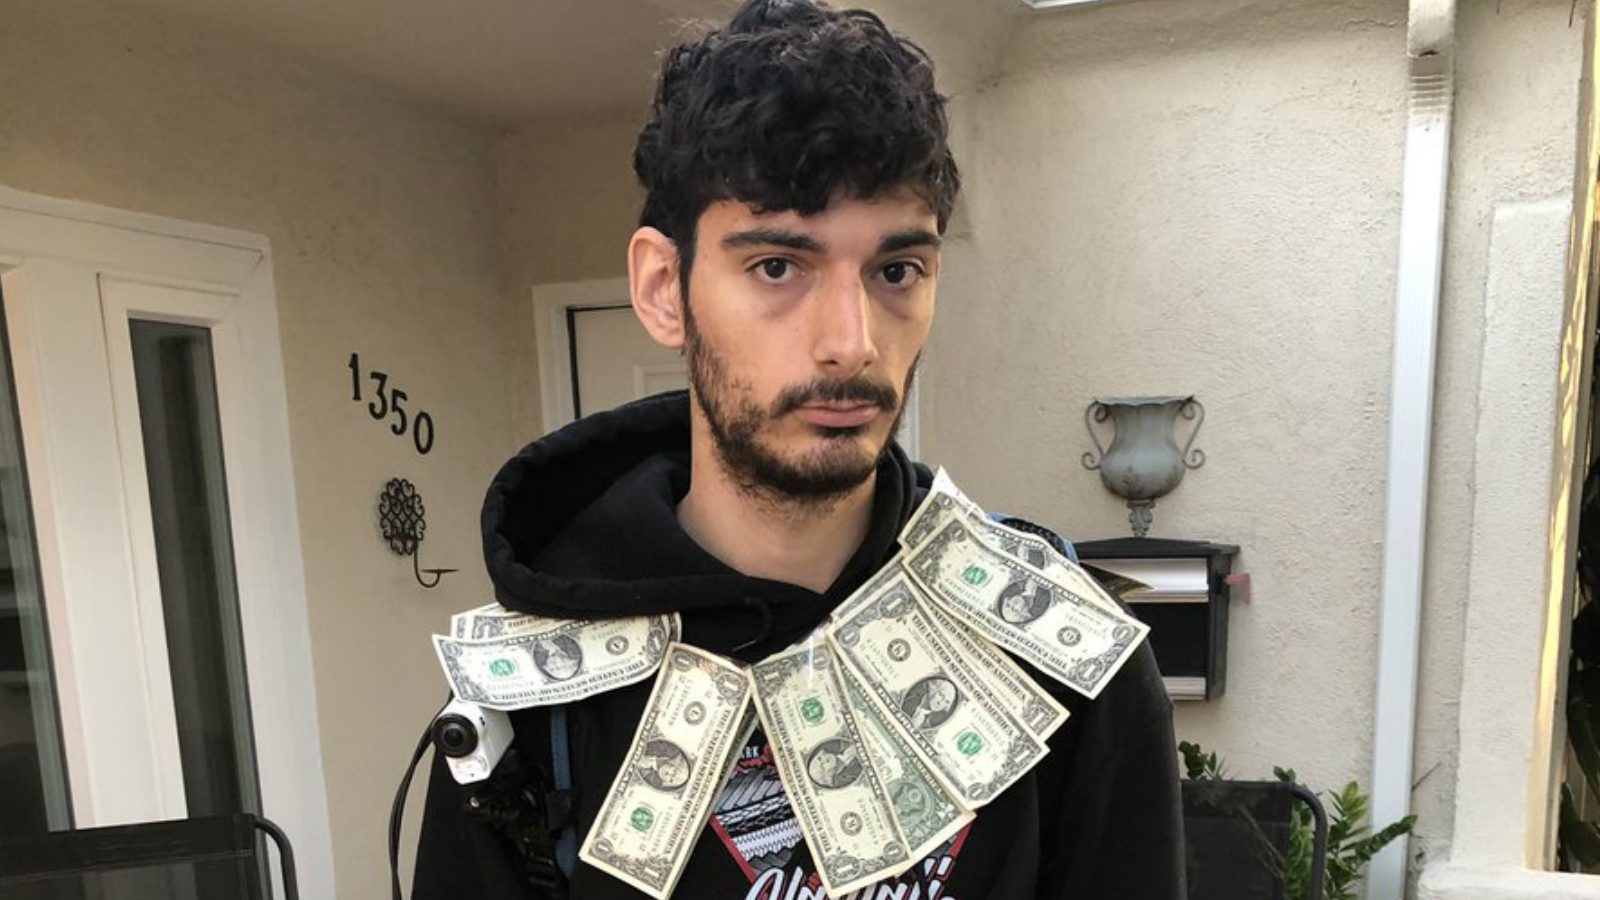 IRL streamer Ice Poseidon has been evicted from several homes in the L.A. a...